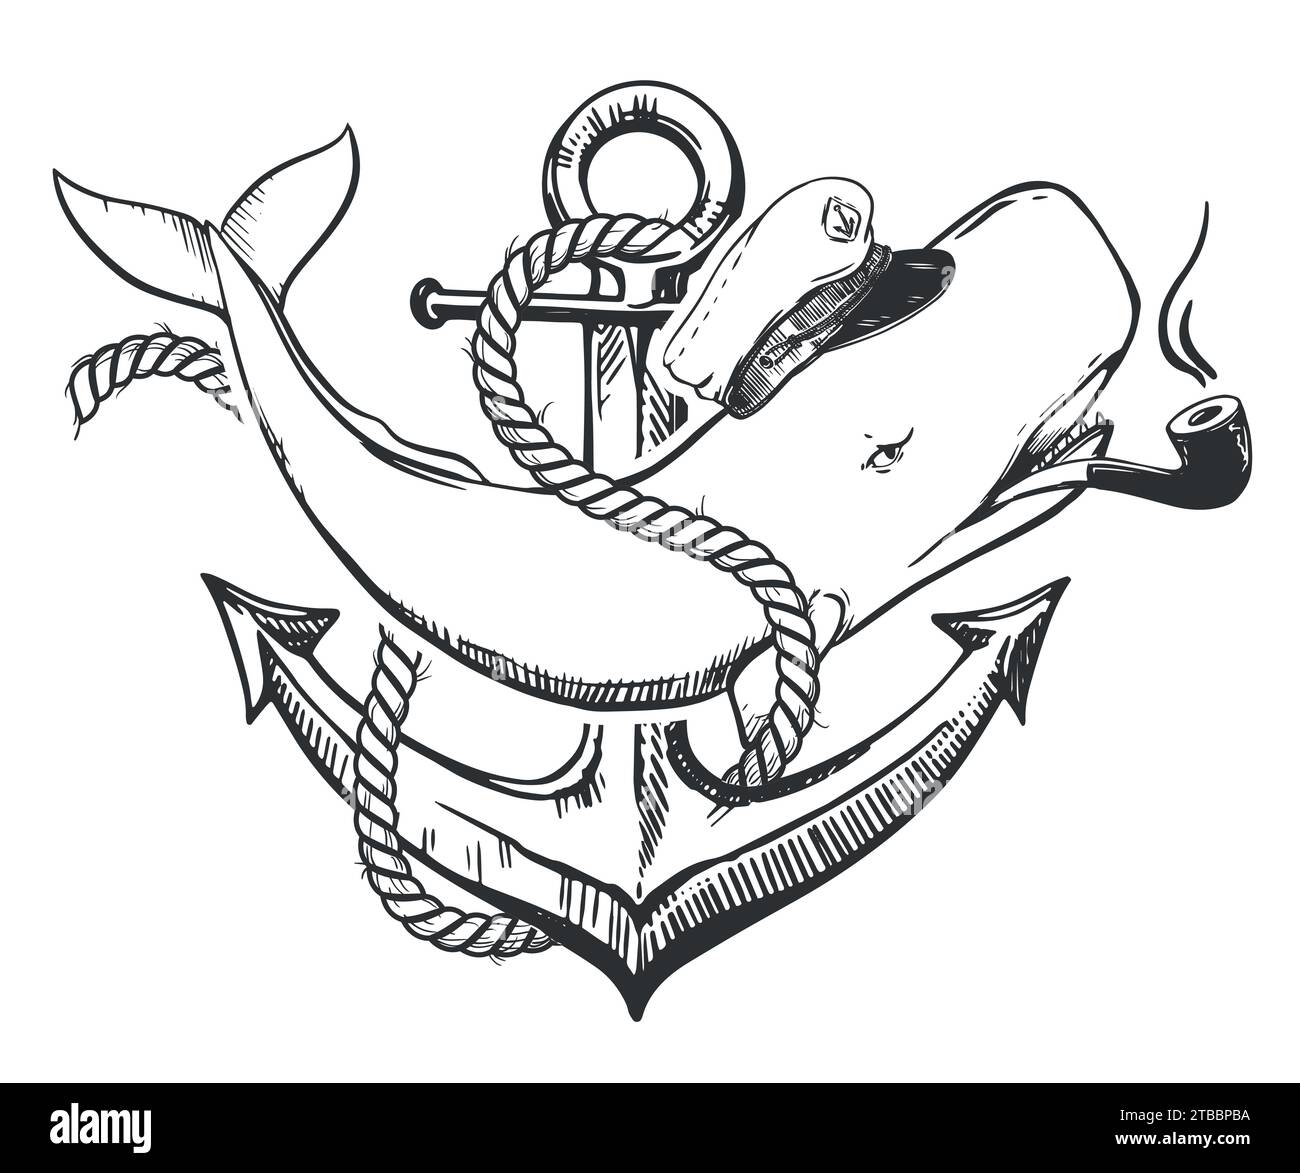 White sperm whale in a capitan cap and with a smoking pipe in his mouth. A creative illustration of a whale entwined with a rope at anchor. Old school Stock Vector